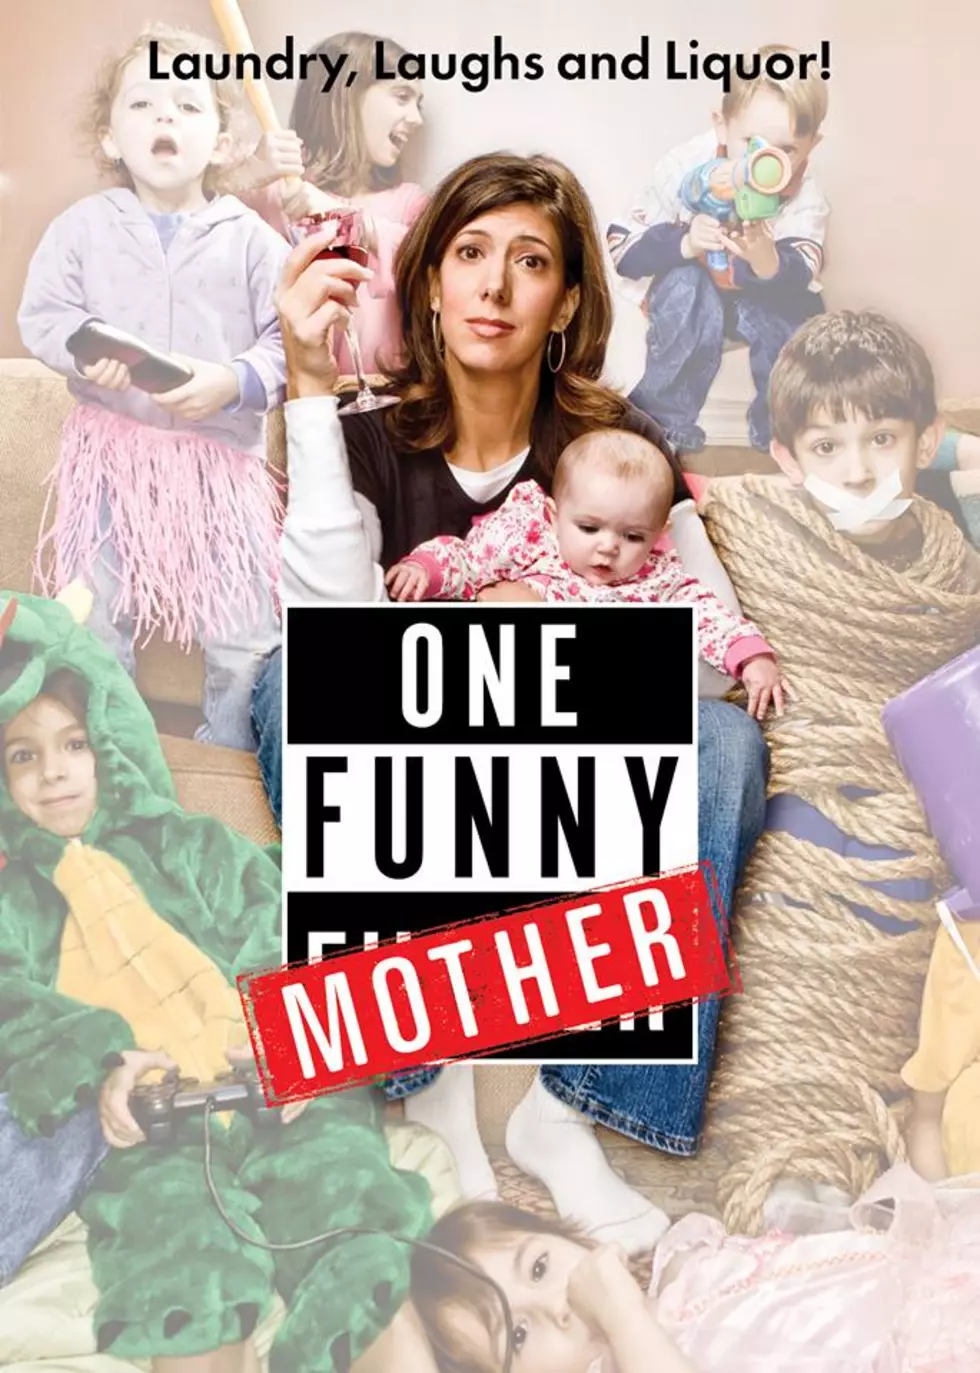 Dena Blizzard's 'One Funny Mother' officially set to open OffBroadway